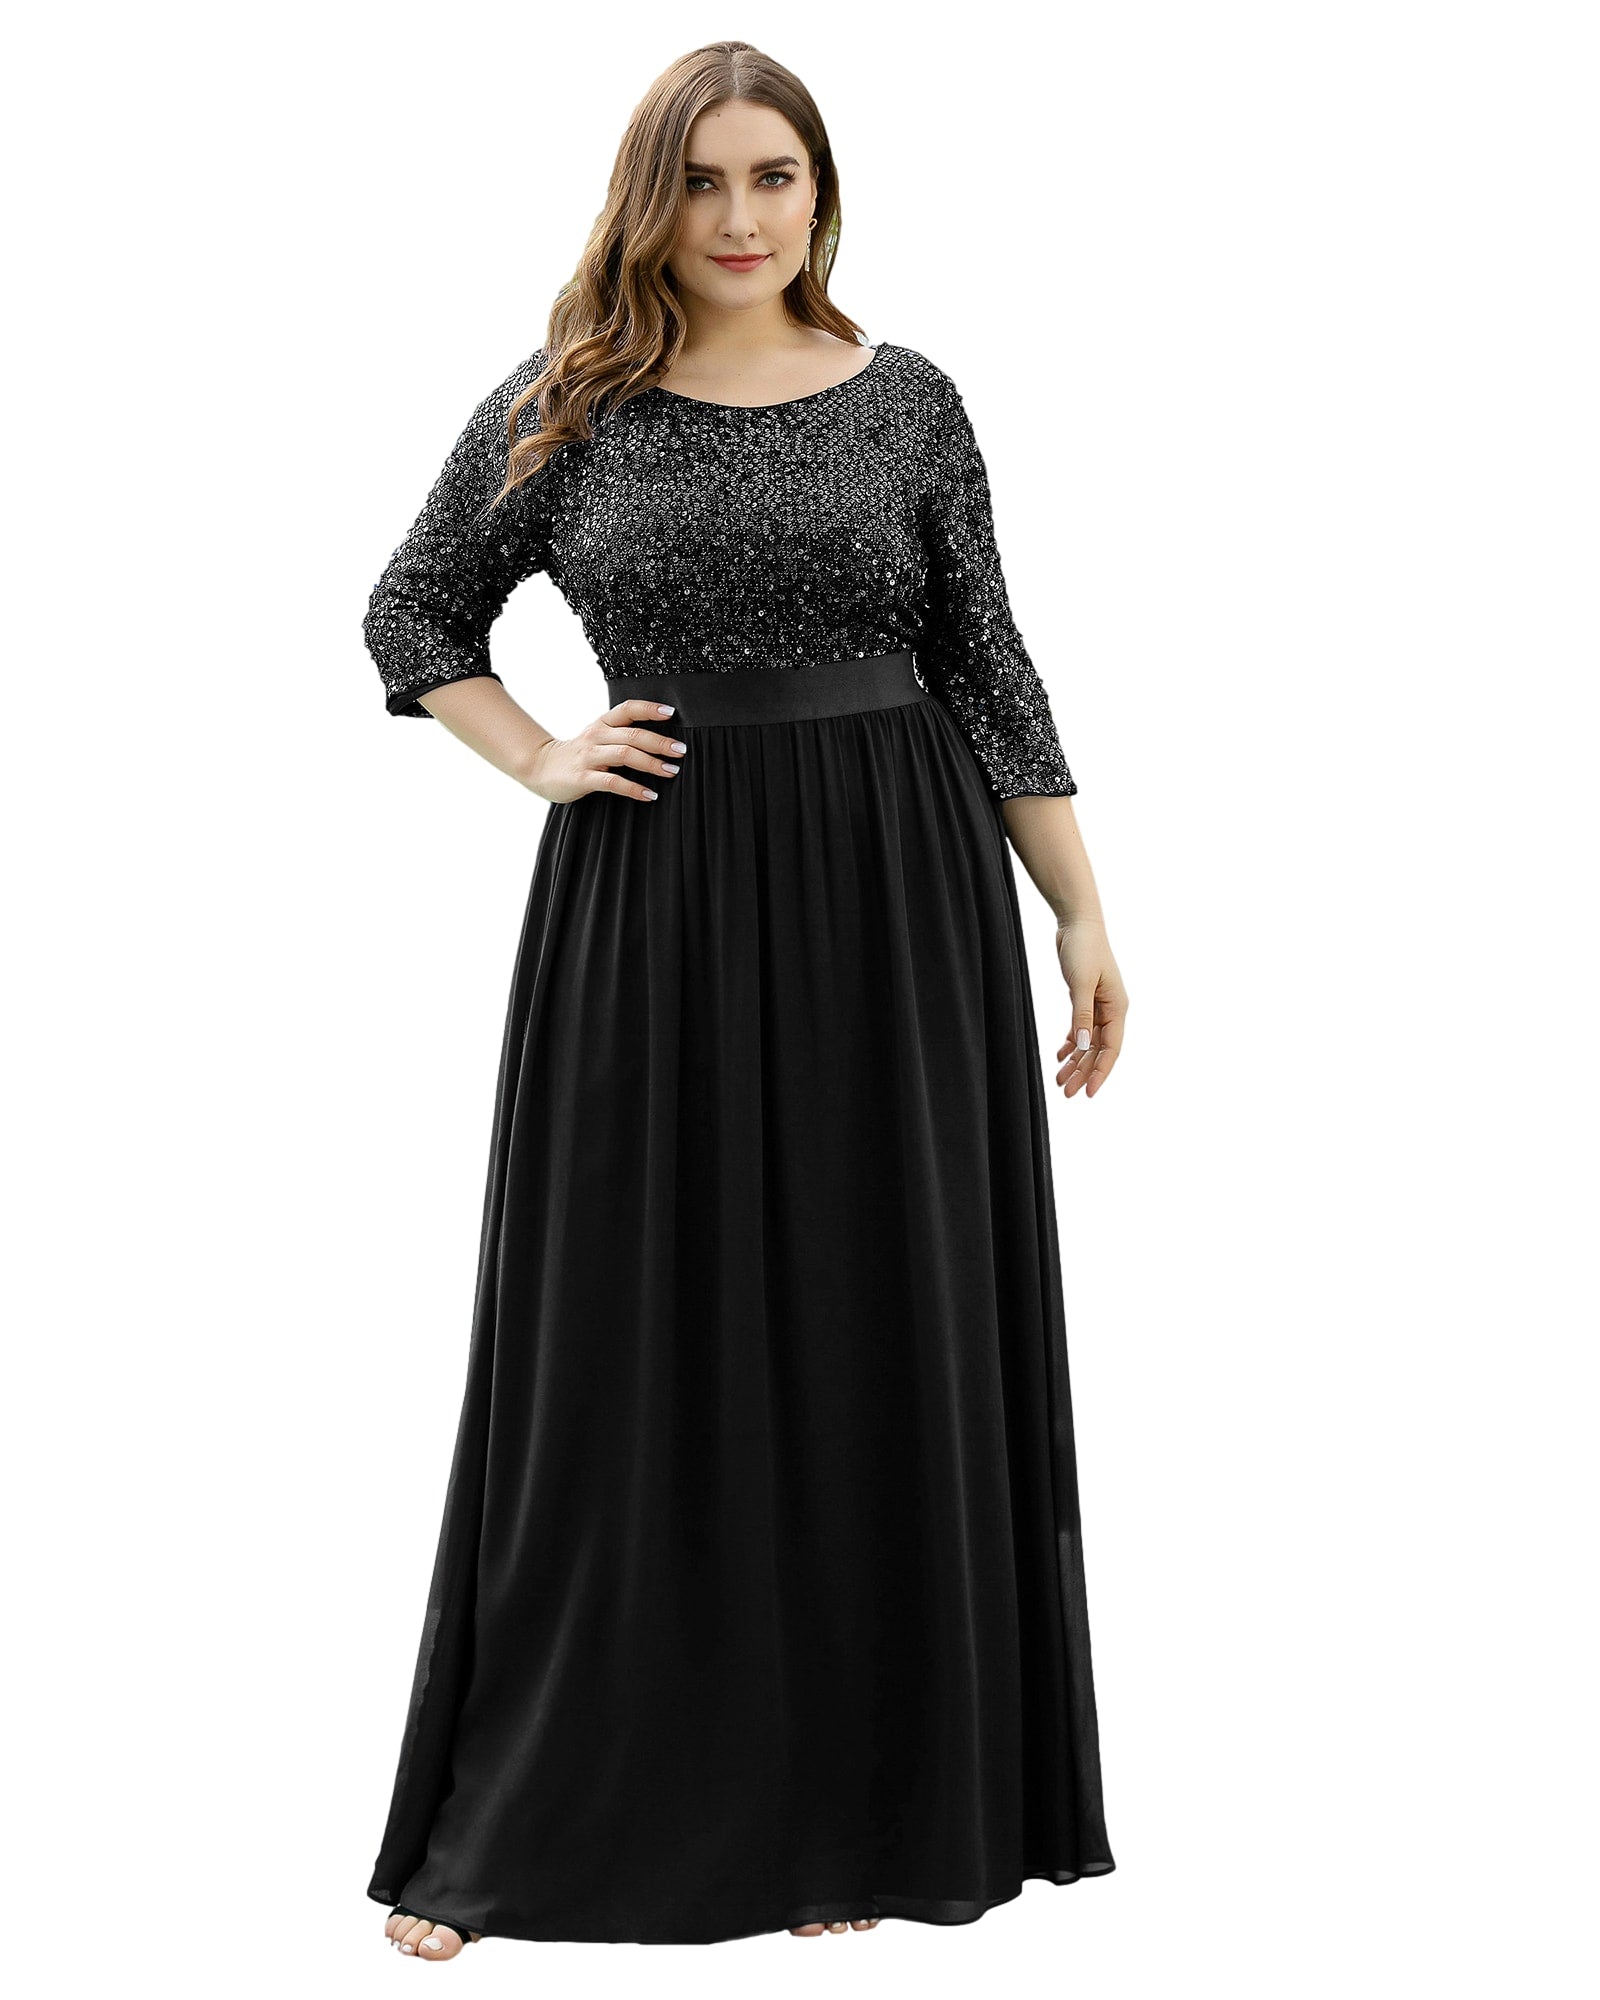 3/4 Sleeves Round Neck Evening Dress With Sequin Bodice | Black